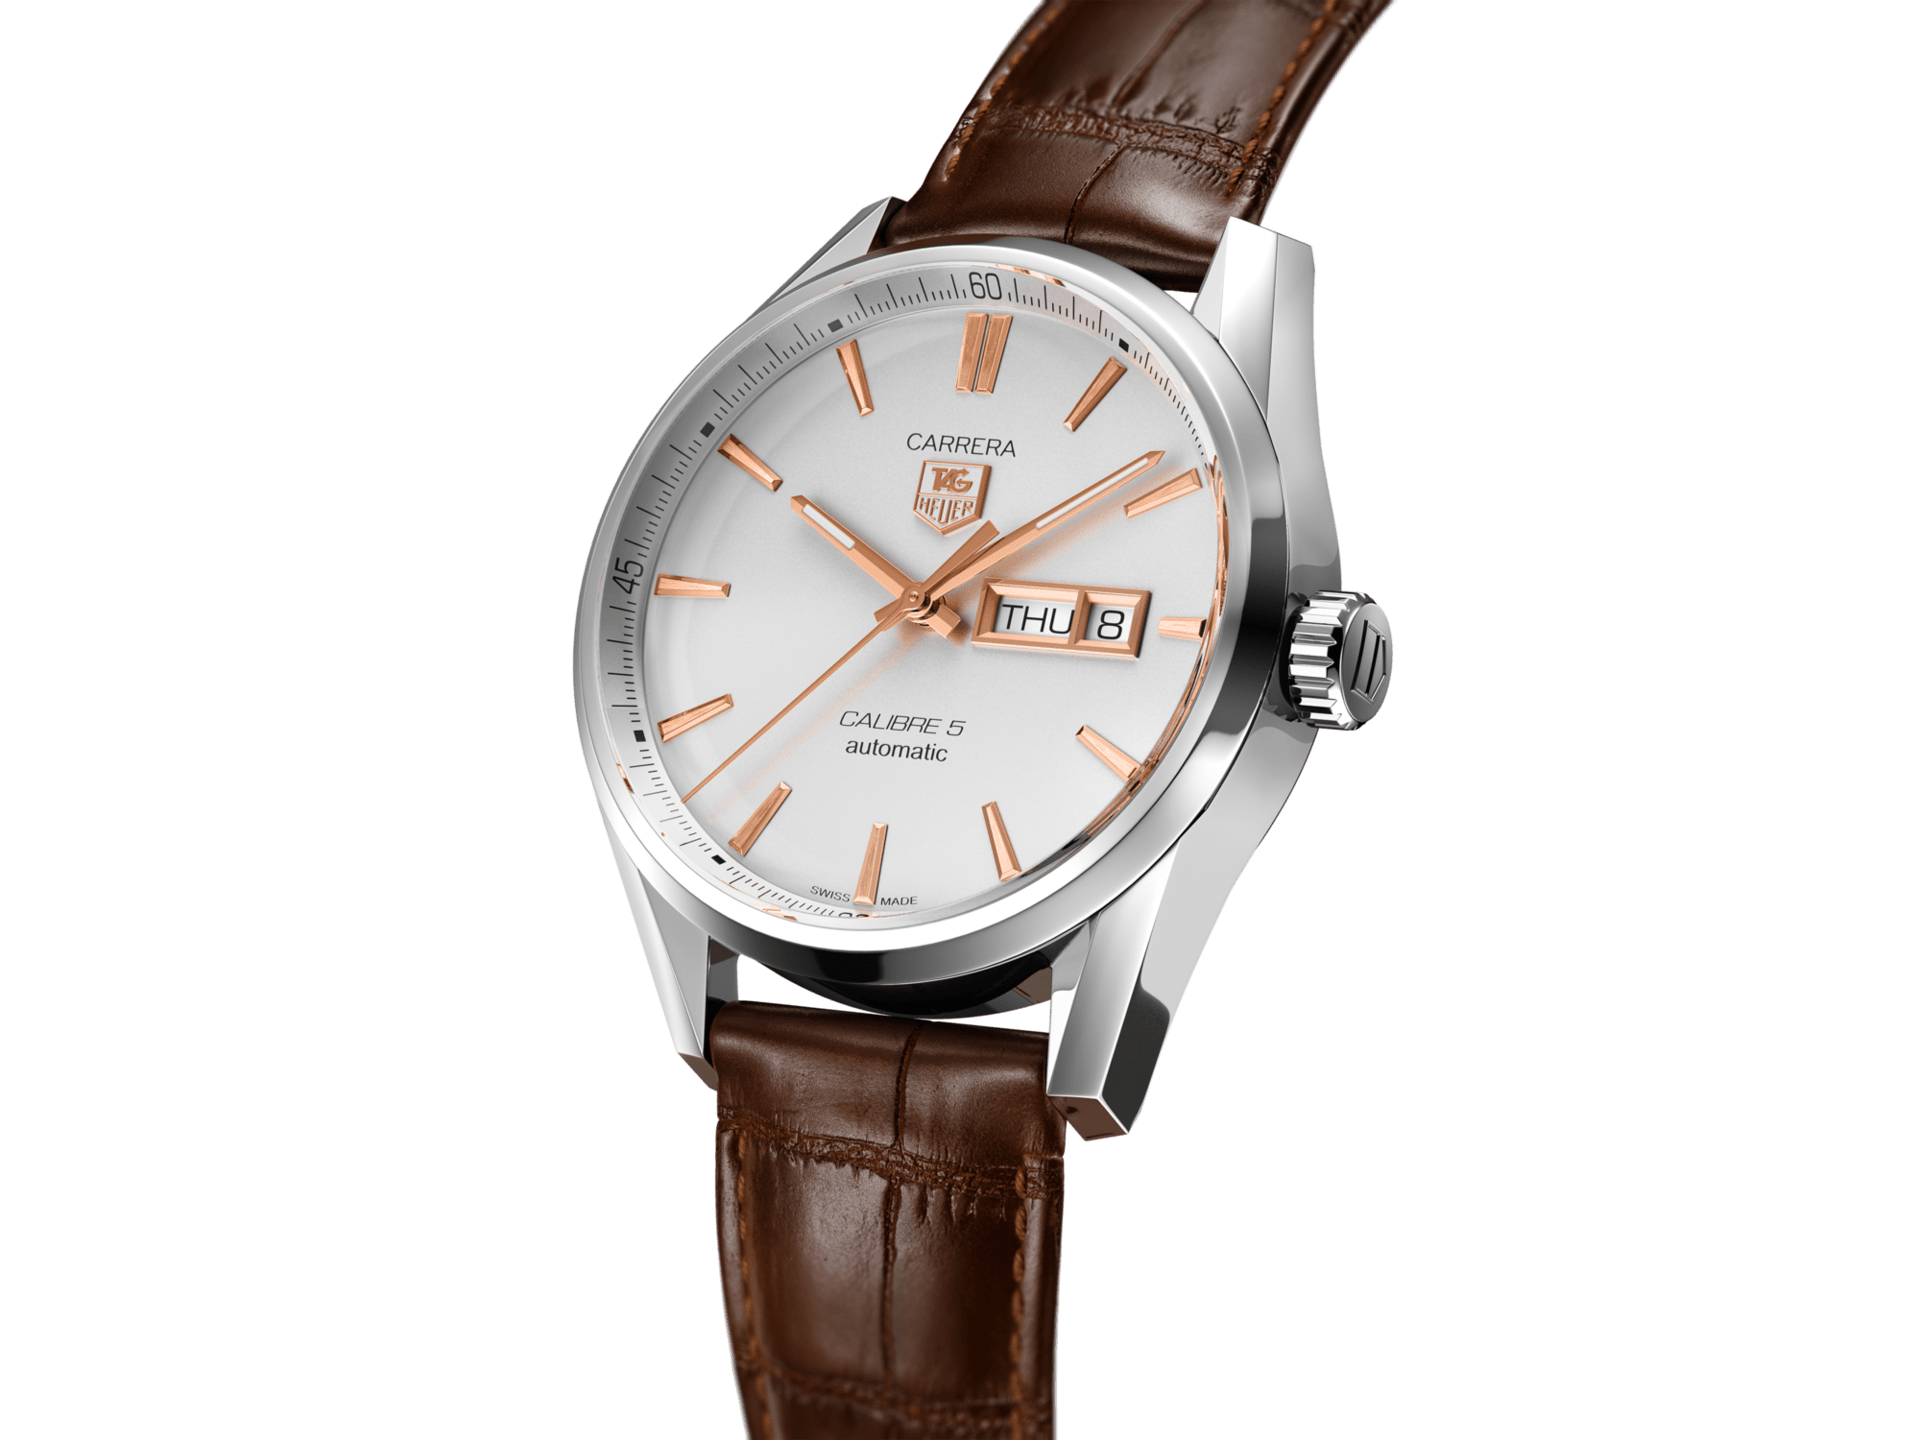 Tag Heuer Carrera Calibre 5 Day-Date - Simmons Fine Jewelry